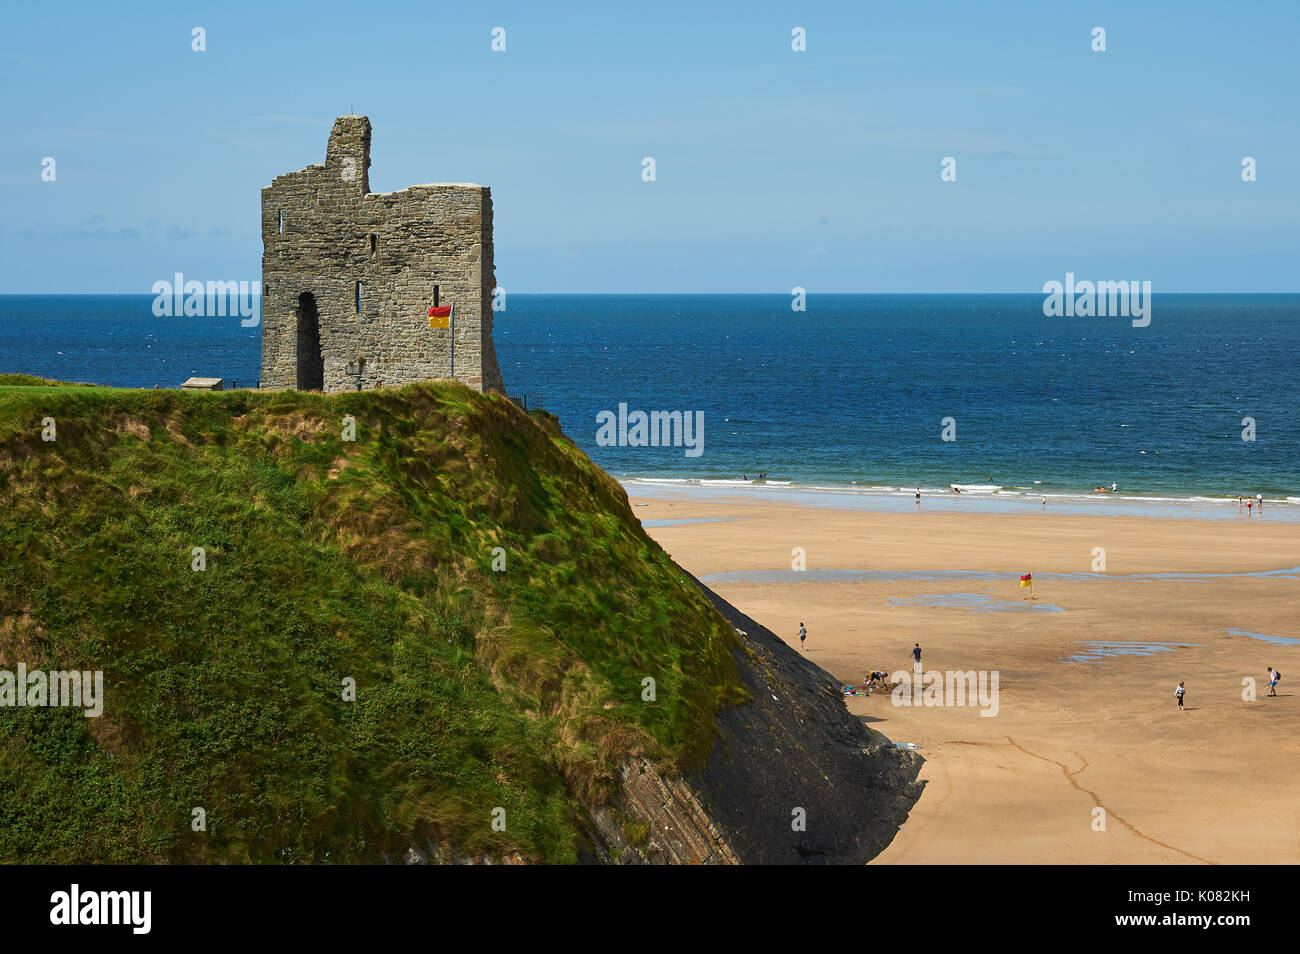 The ruins of Ballbunion castle in County Kerry over look the wide sandy beach and the Atlantic Ocean on a calm summer day. Stock Photo